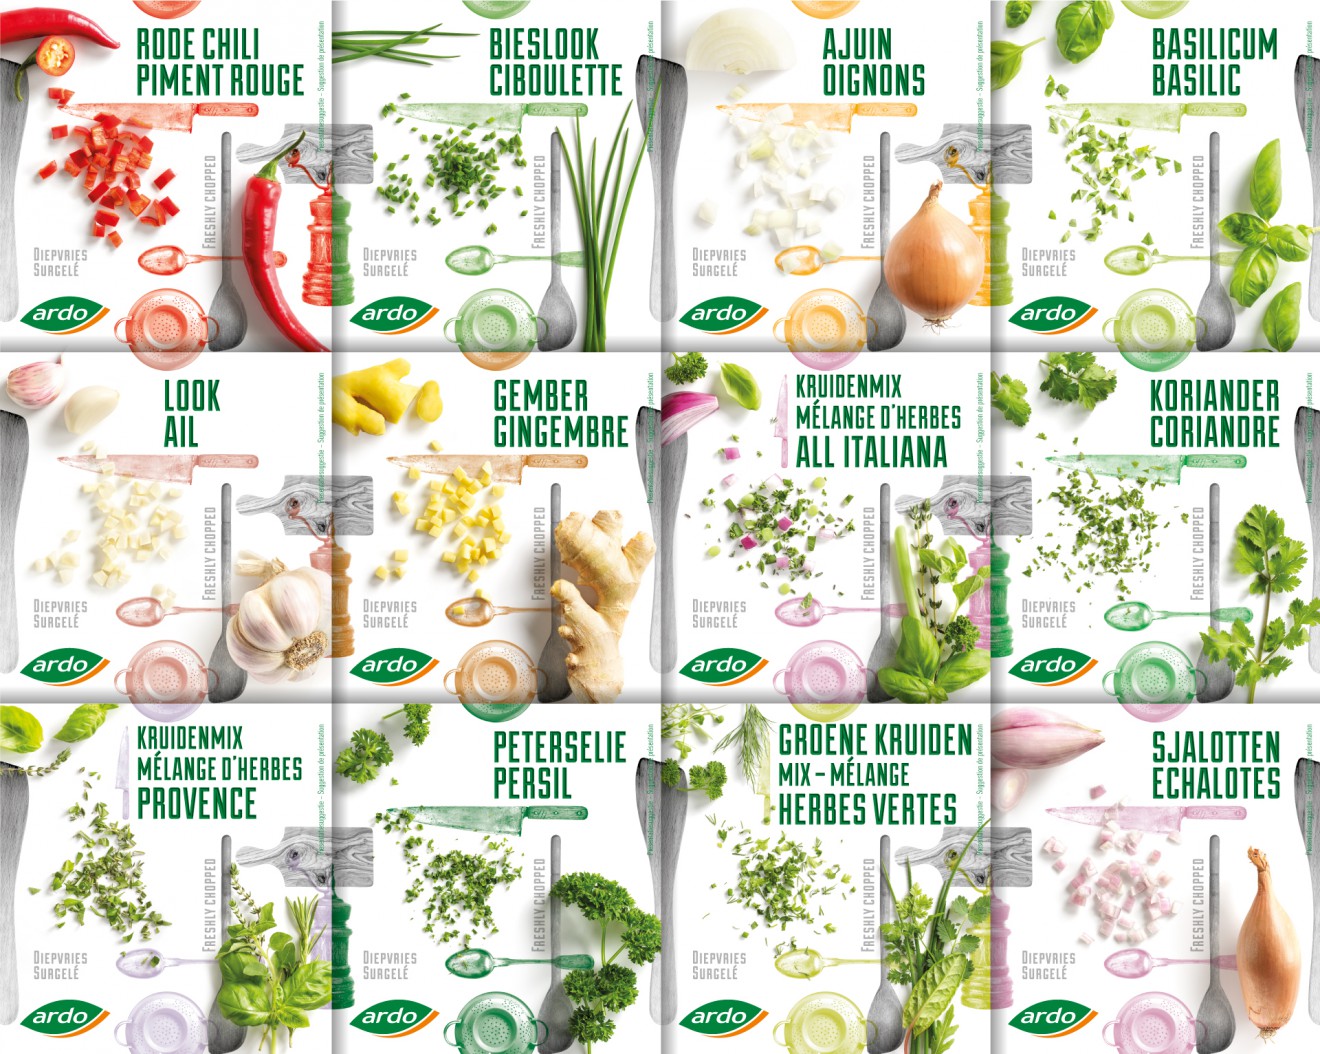 Quatre Mains package design - fresh herbs, chili, spices, lyophilized